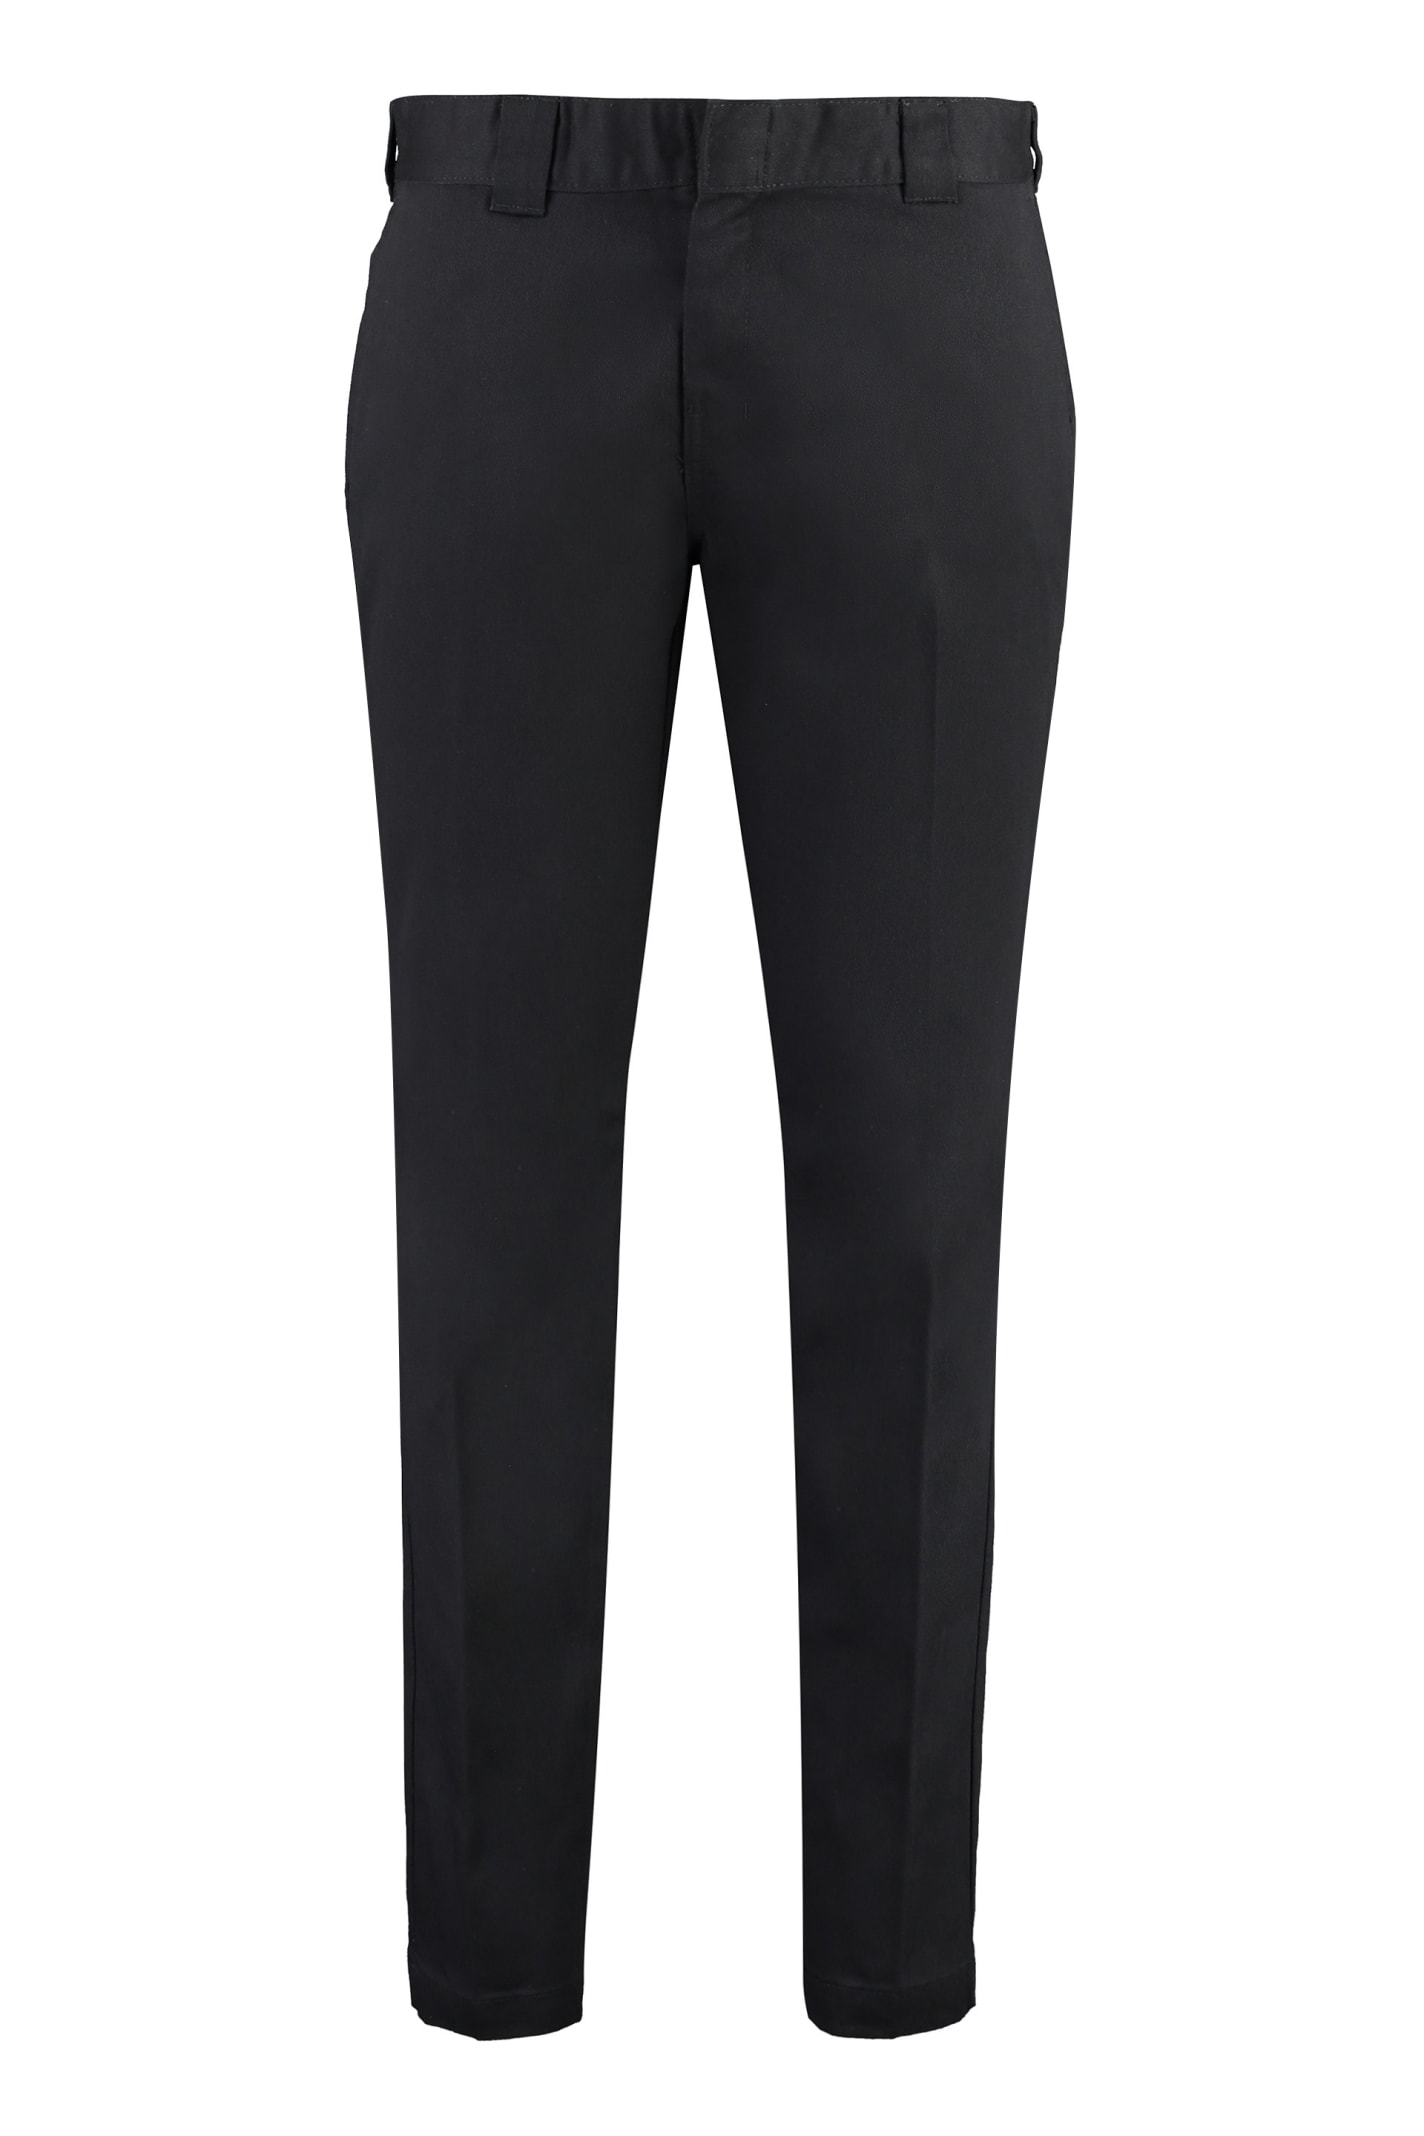 872 Slim Fit Trousers